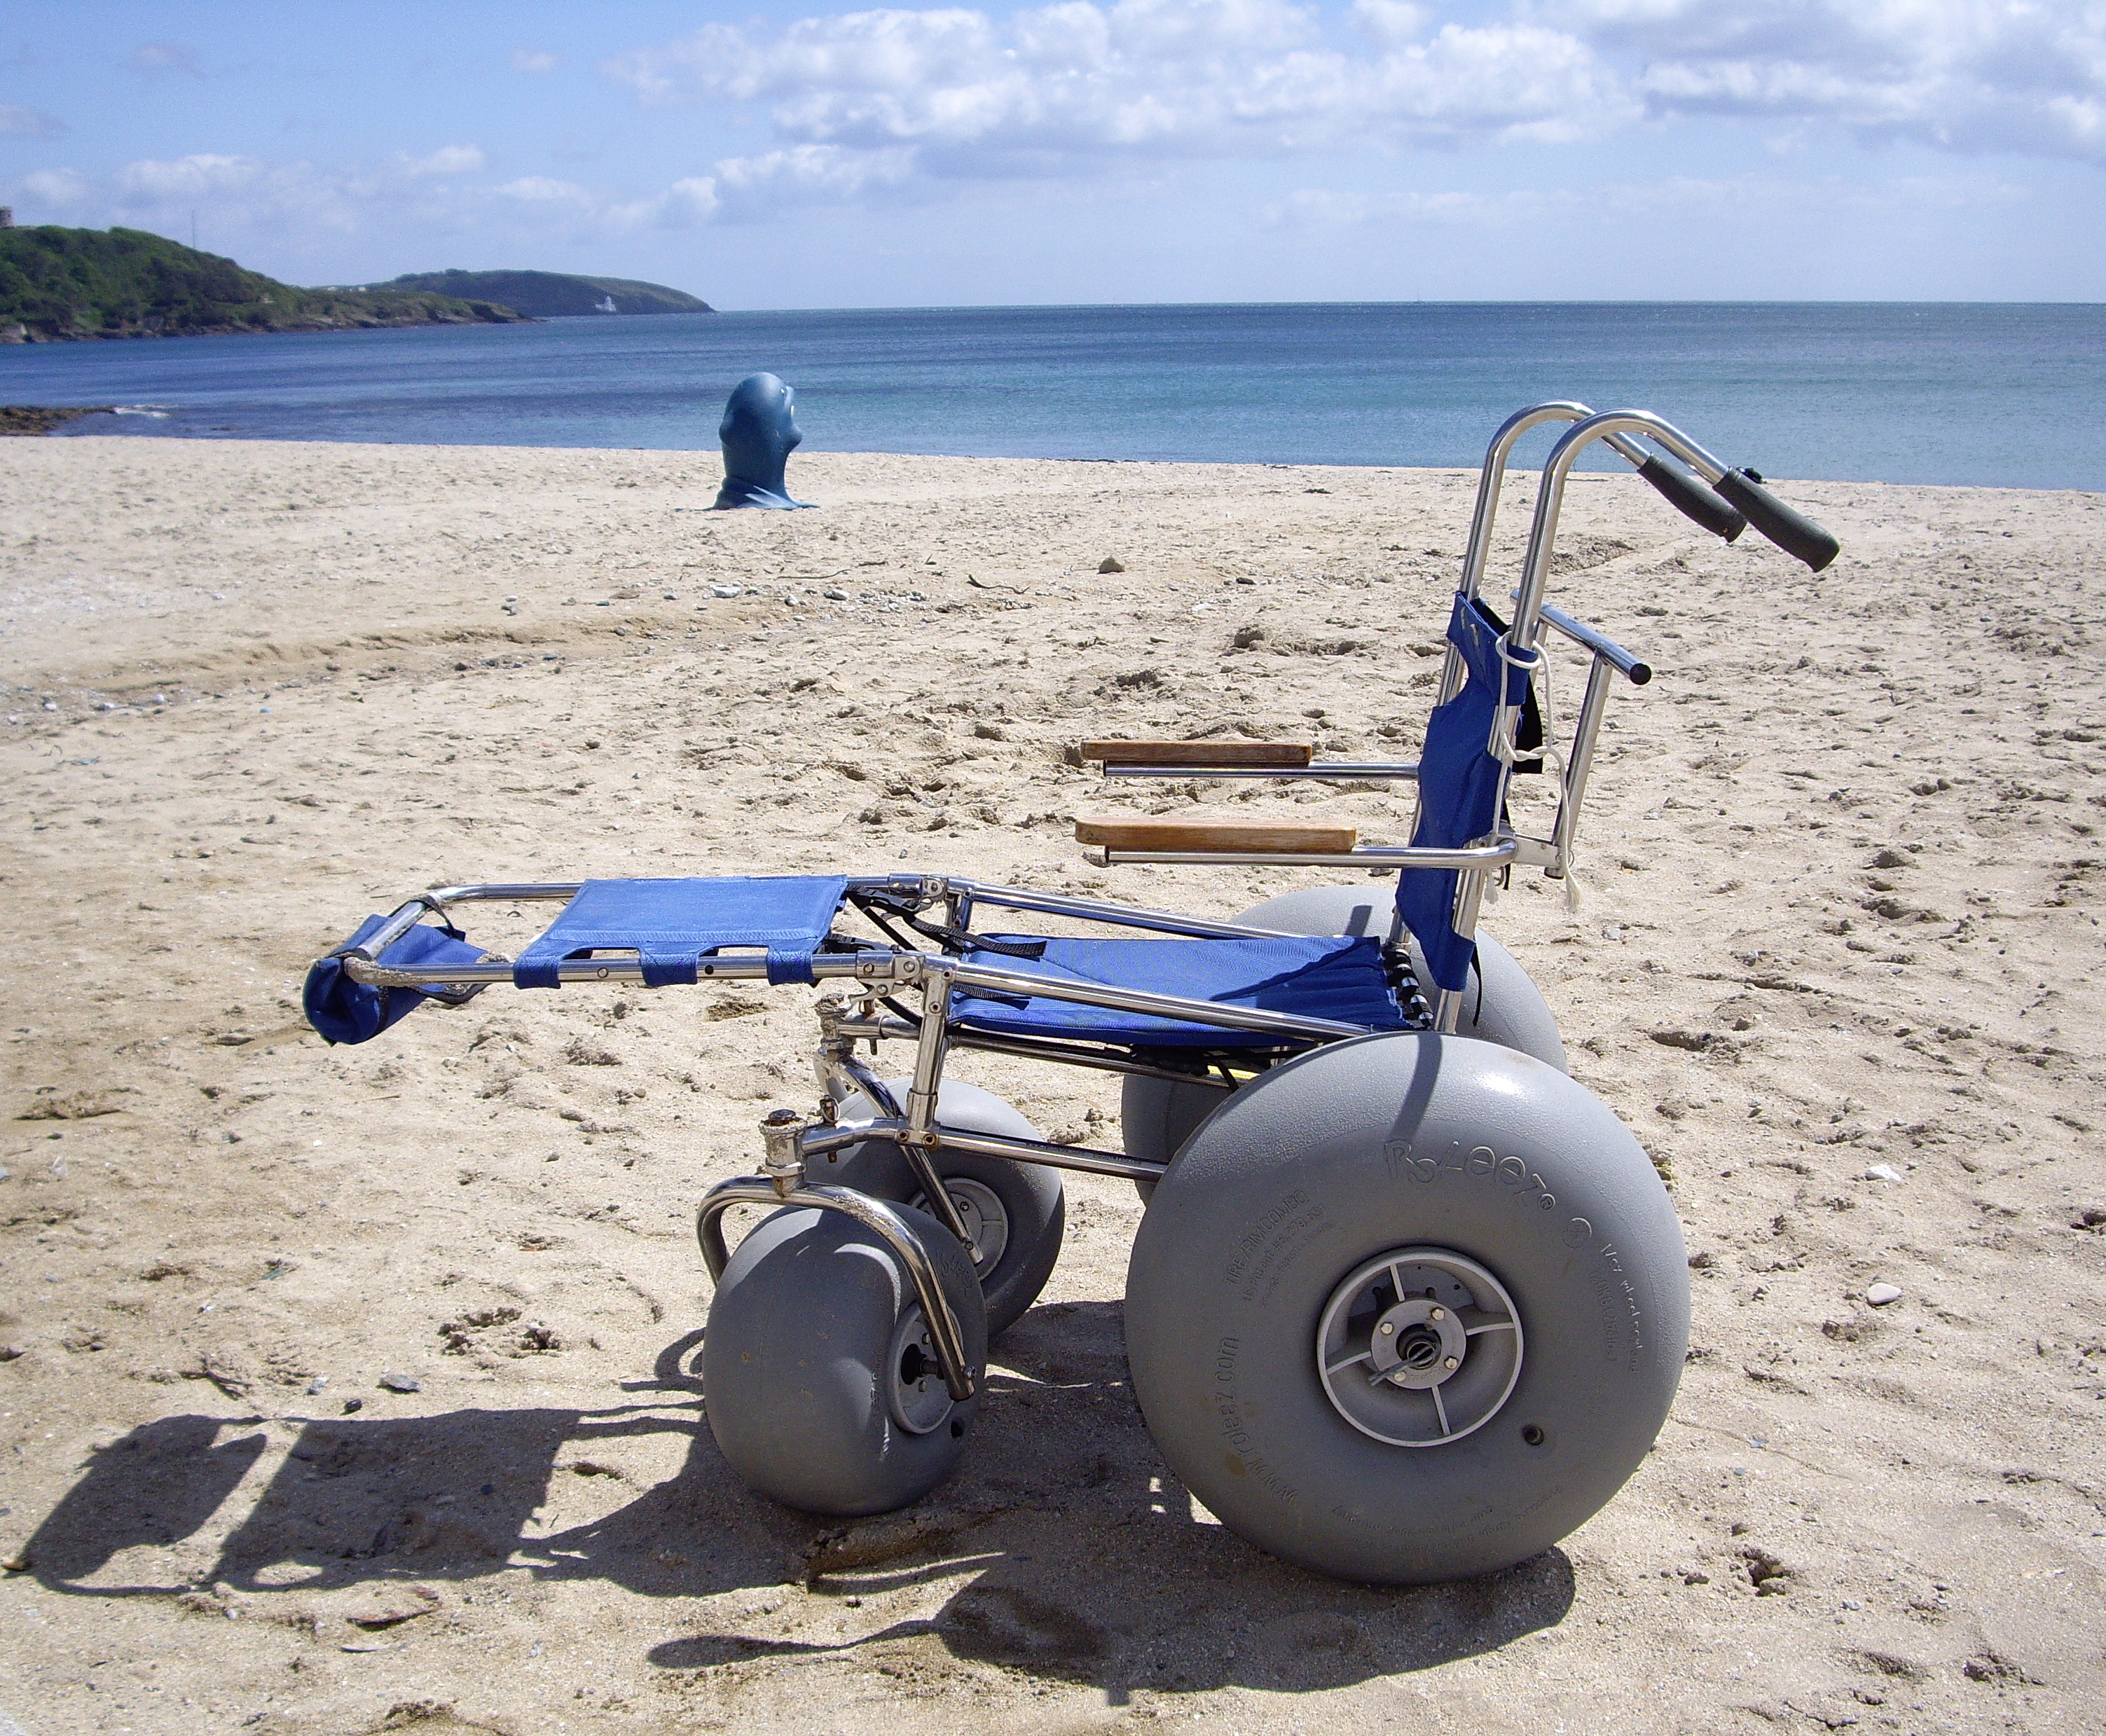 A sand chair on a beach, with the sea behind. It is a basic, upright mesh seatwith leg support extended. Woor armrests on metal poles, no head support, no body support and no lap belt or supportive harness. Large air wheels at the front and huge air wheels at the rear.